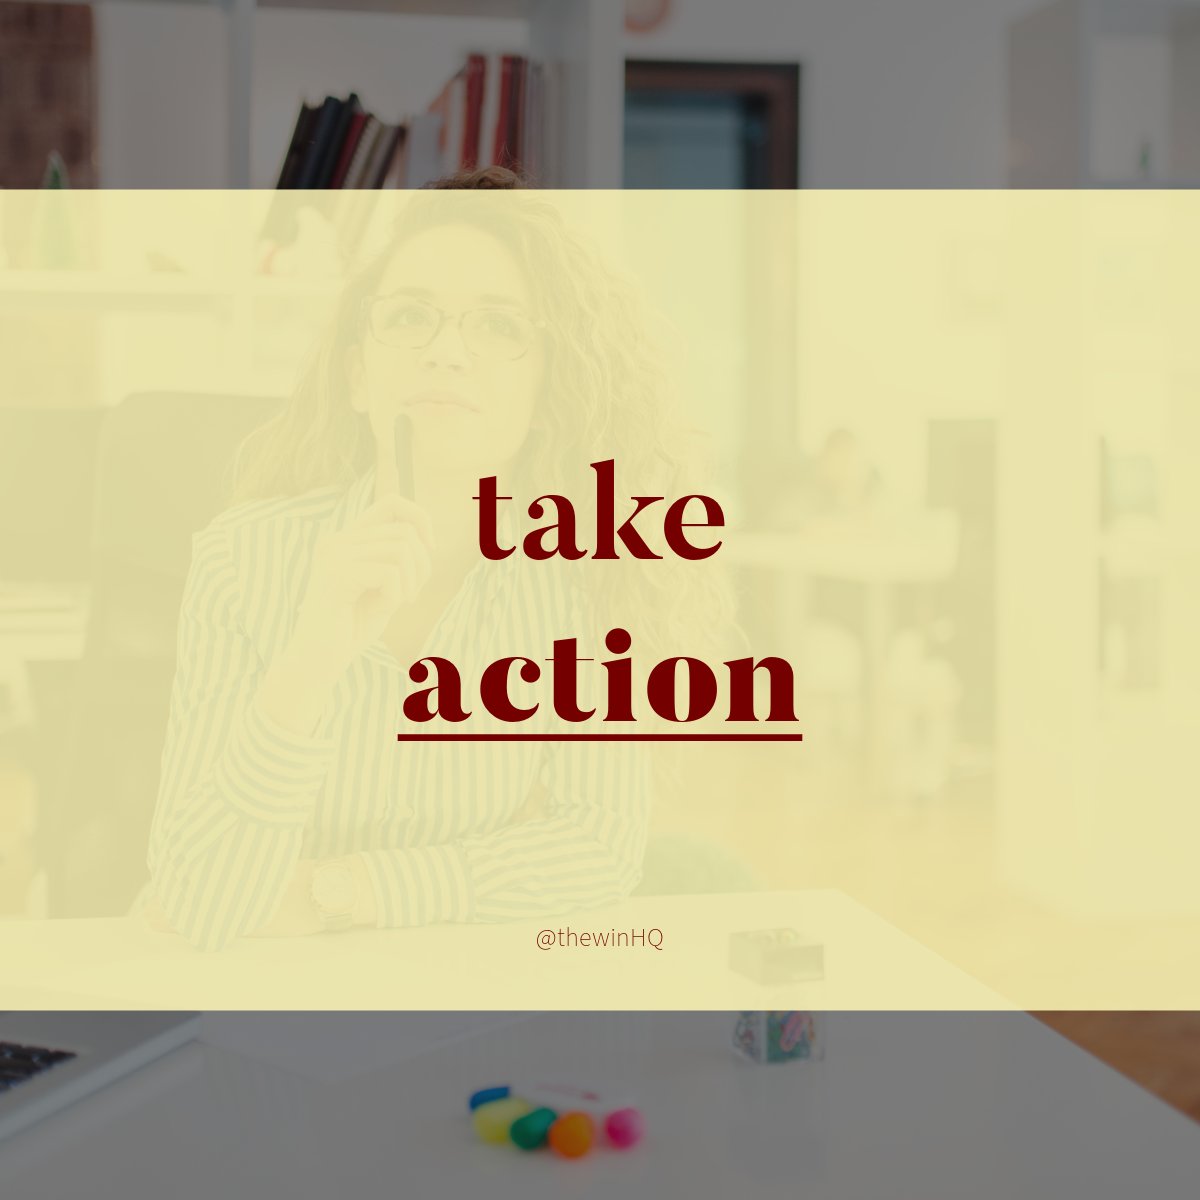 The best way to get unstuck in your career? Take action. Follow the direction of what lights you up and with each breadcrumb you’ll eventually find your path. #CareerClarity